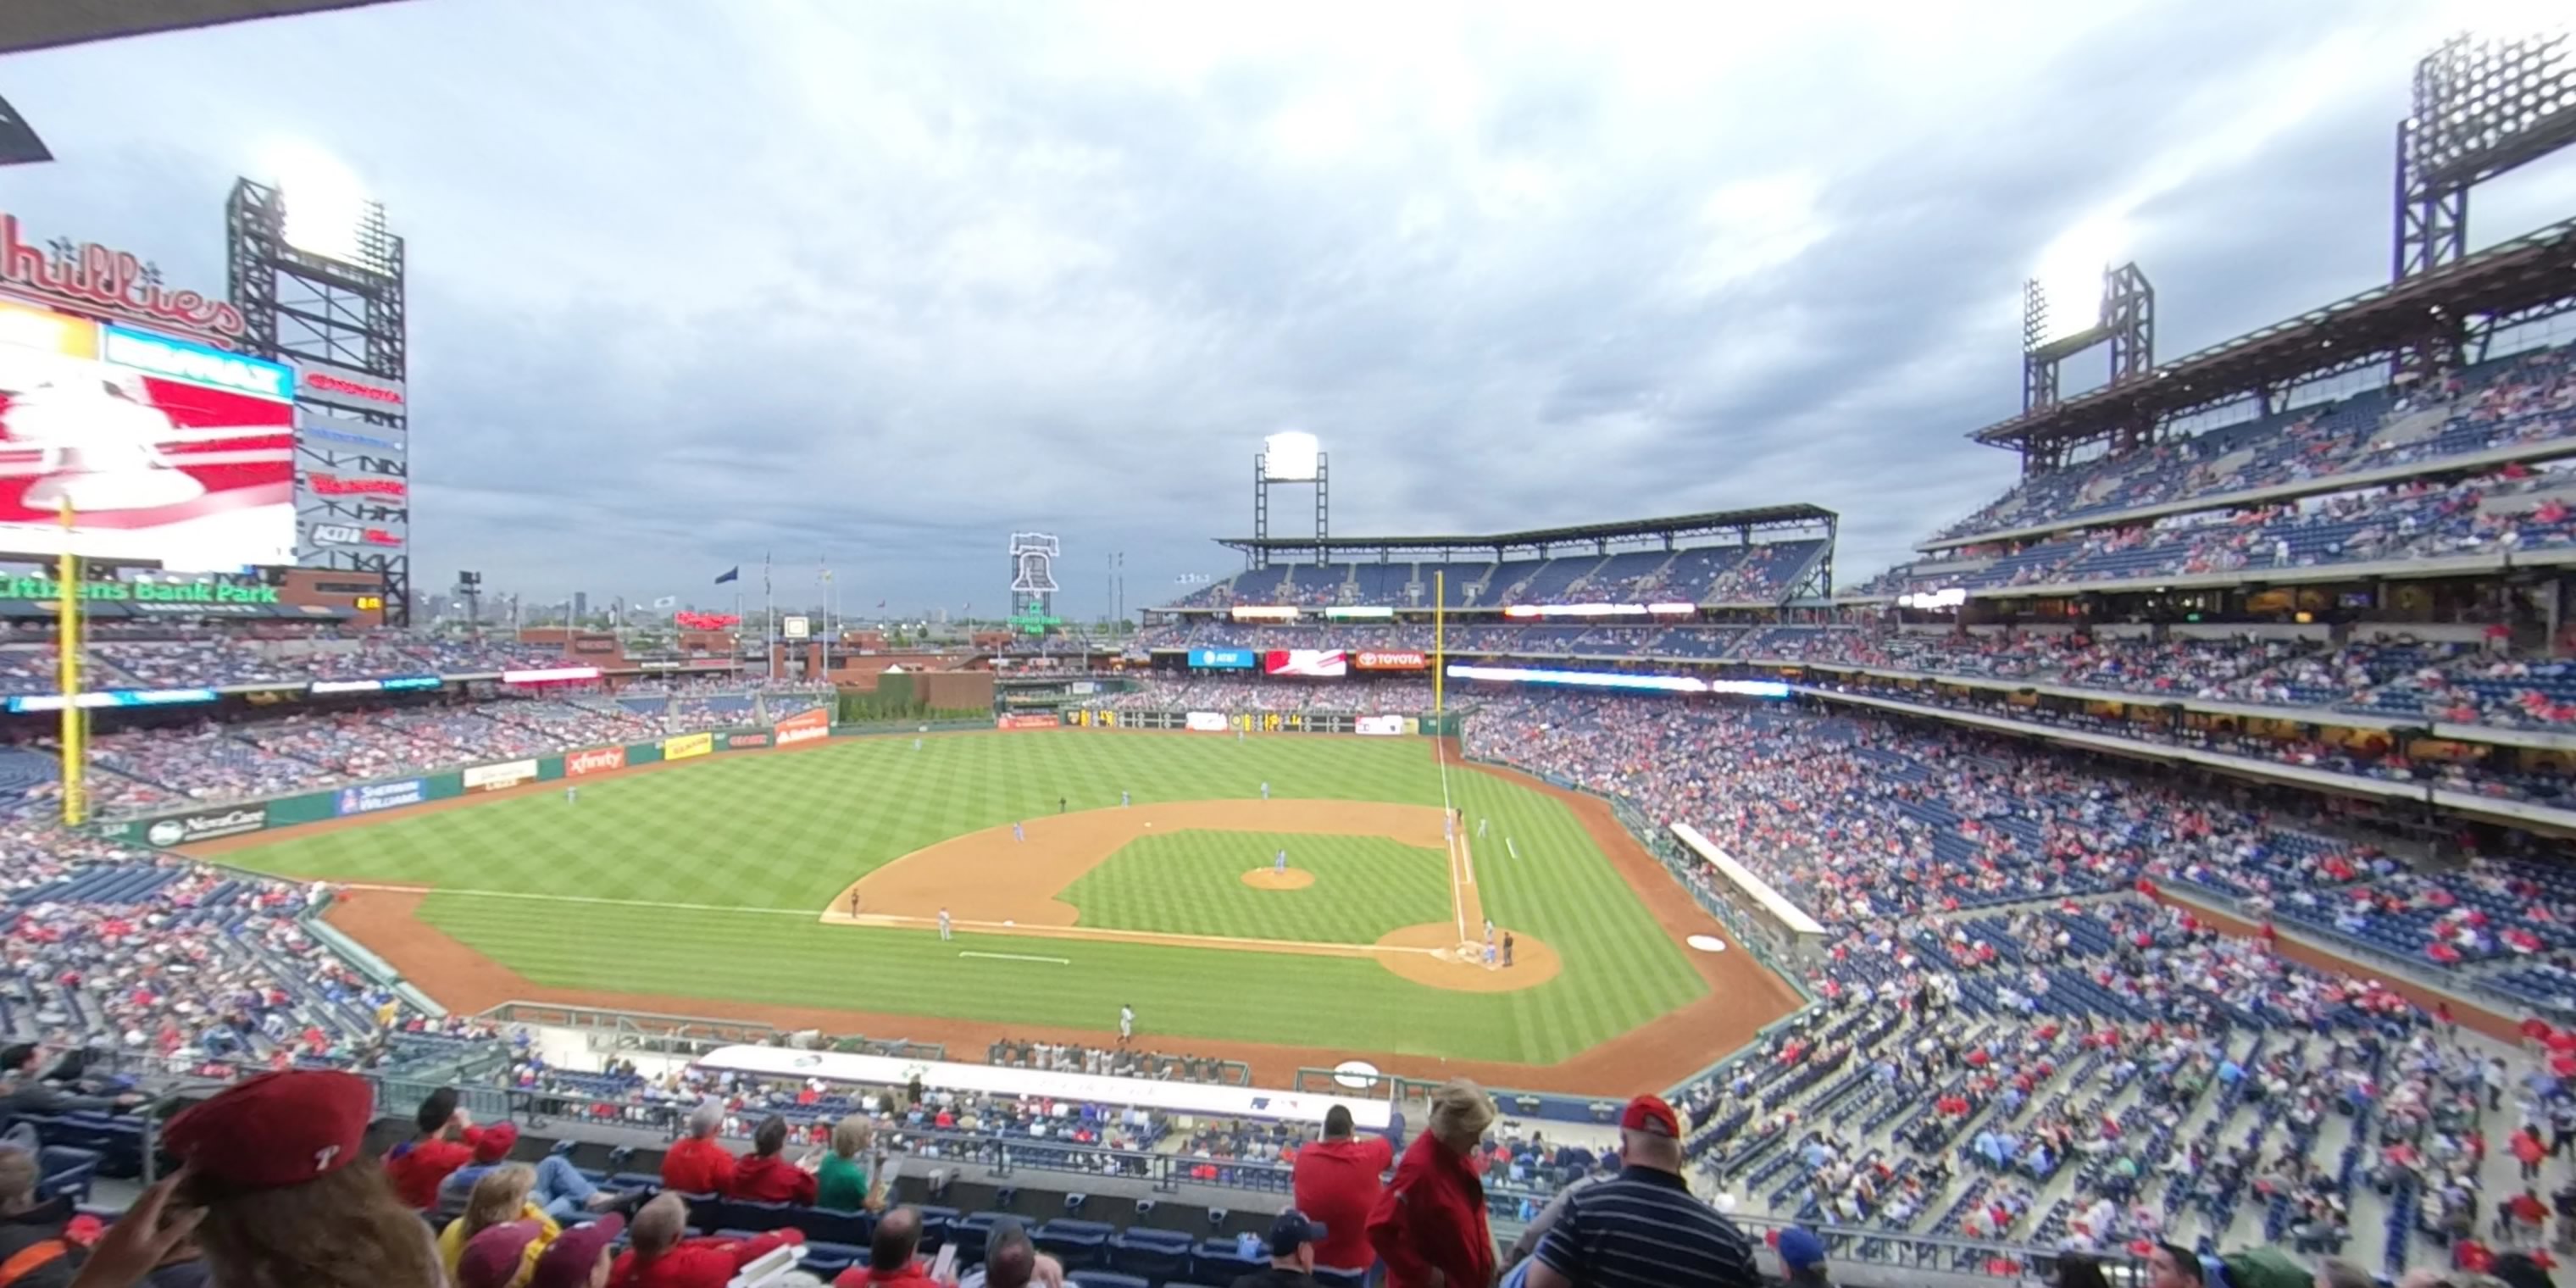 section 226 panoramic seat view  for baseball - citizens bank park